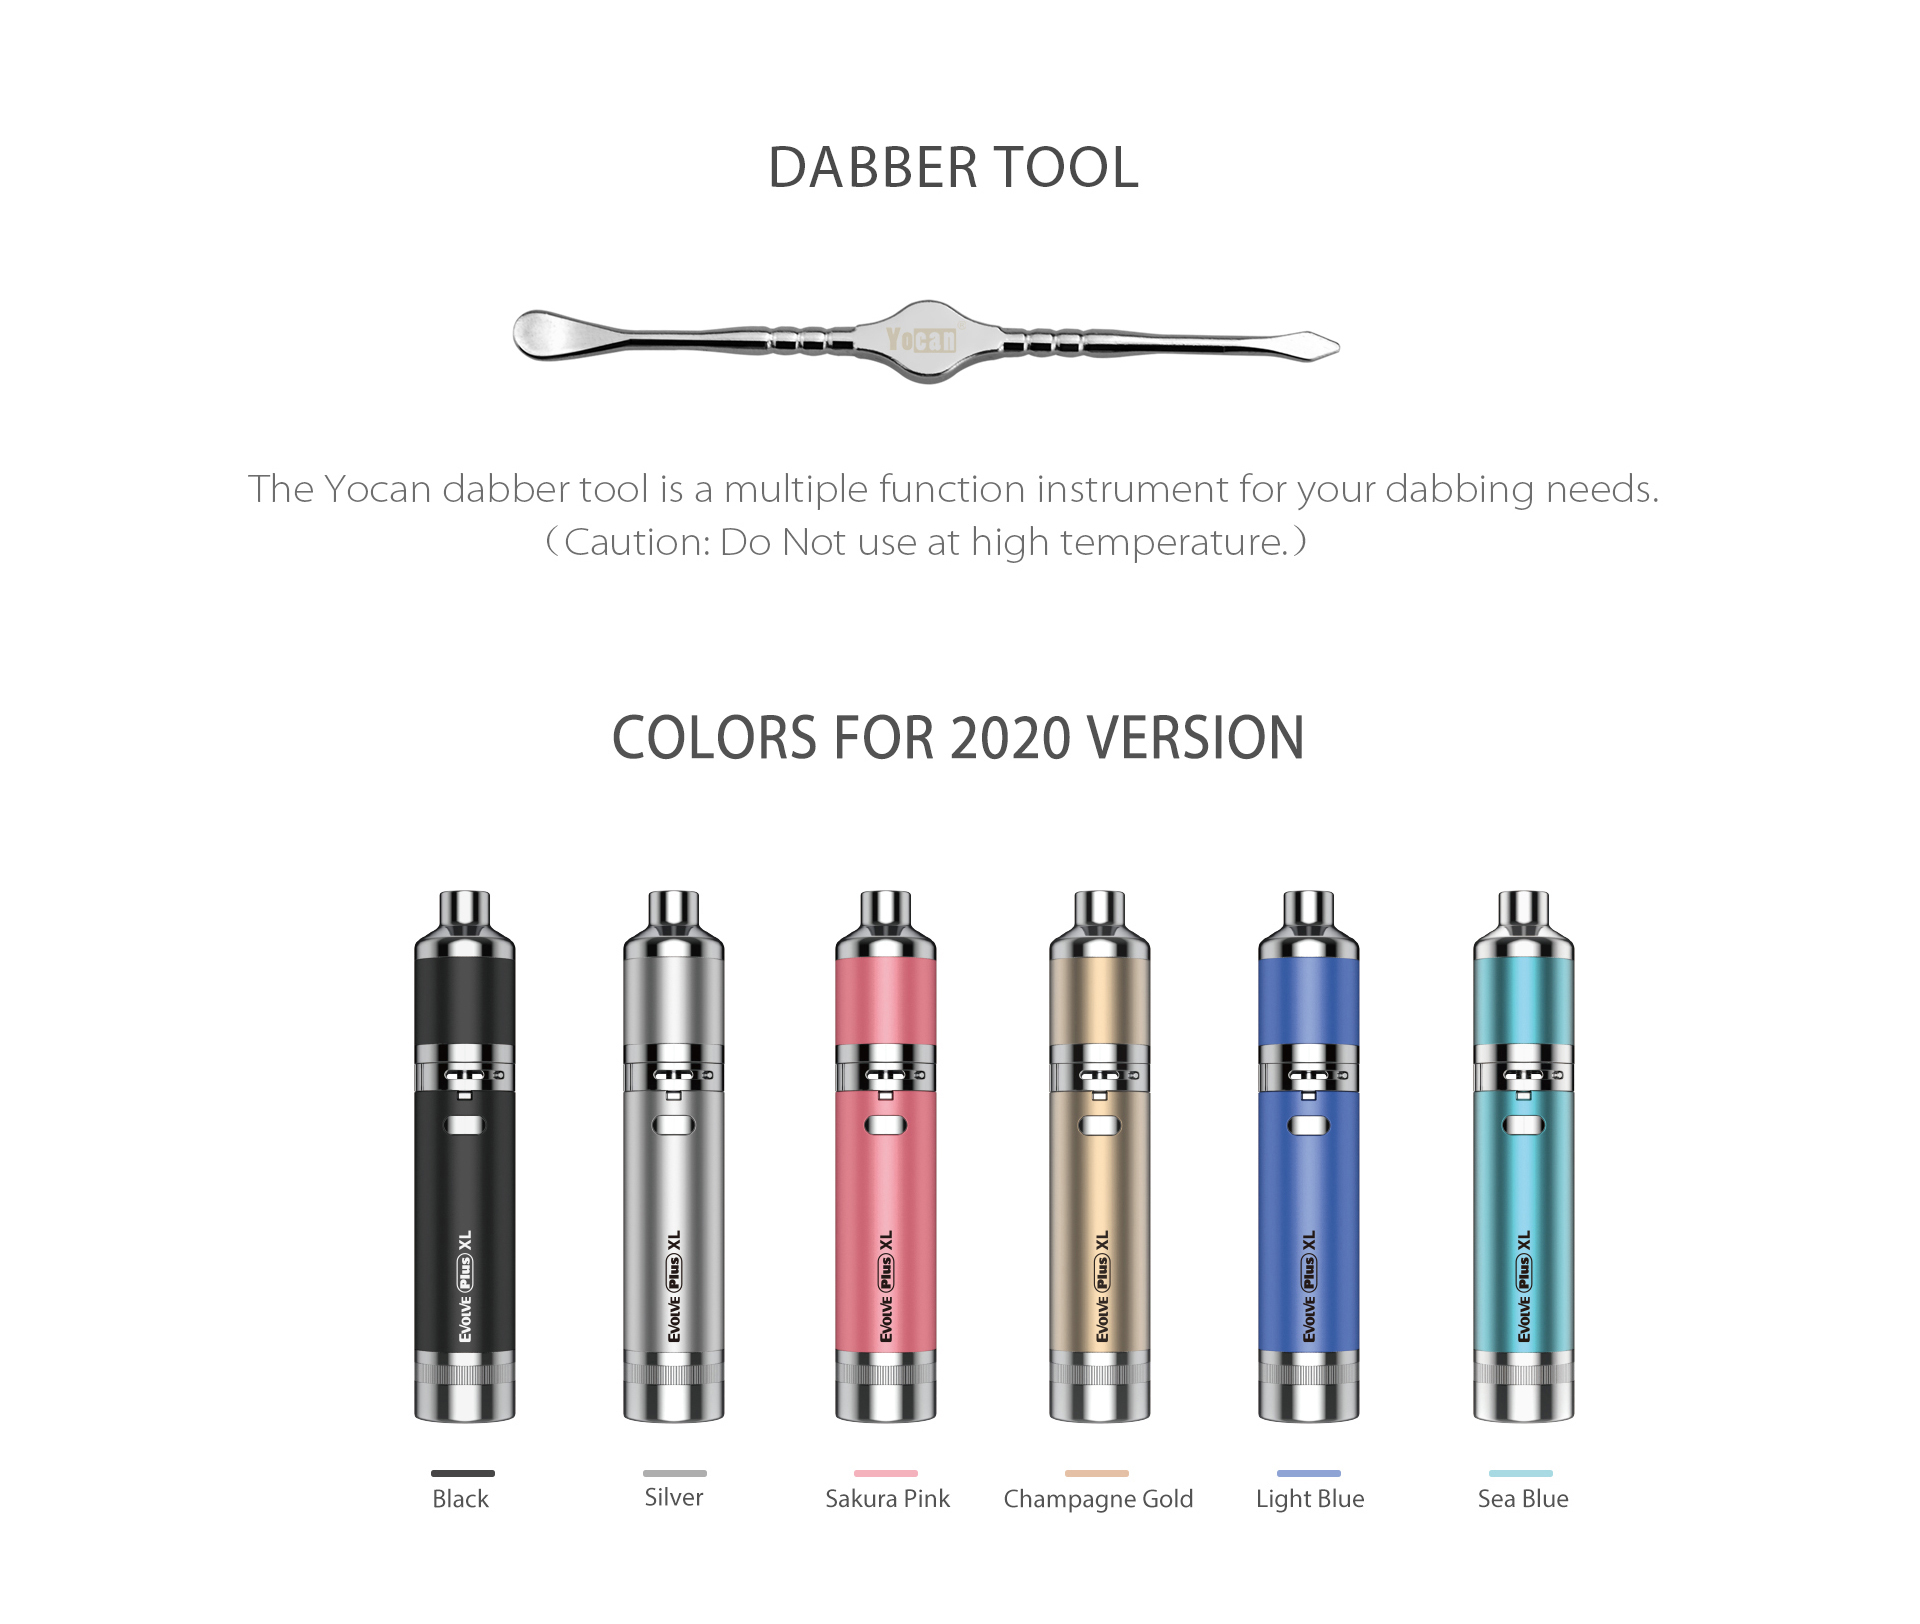 The Yocan dabber tool is a multiple function instrument for your dabbing needs.